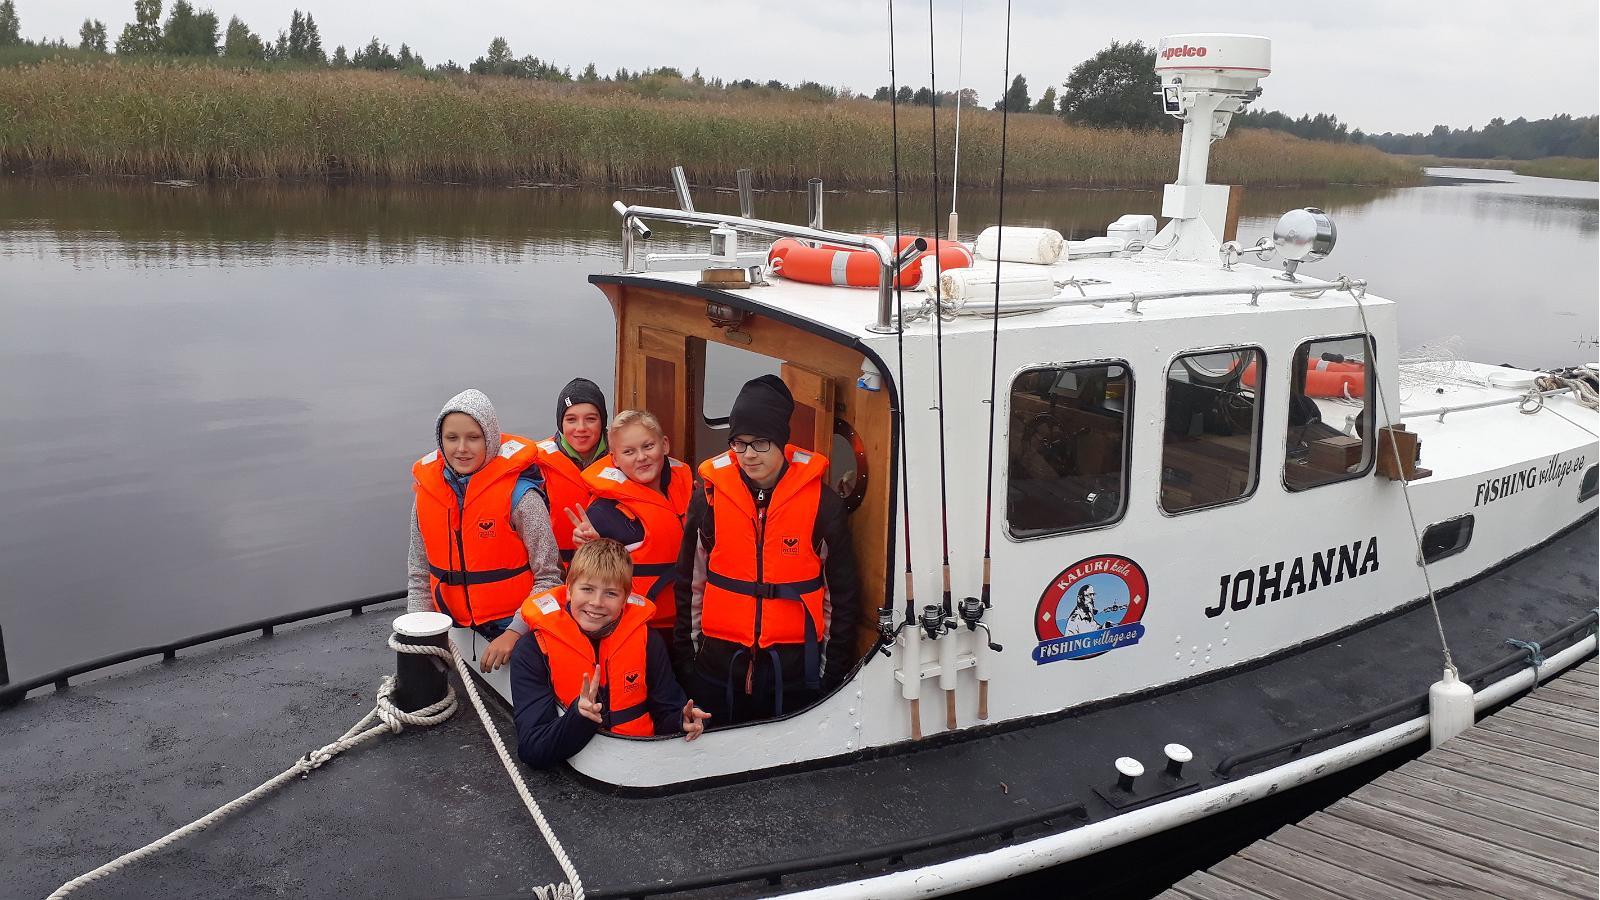 Ferry trip in Pärnu with the historic packet boat Johanna